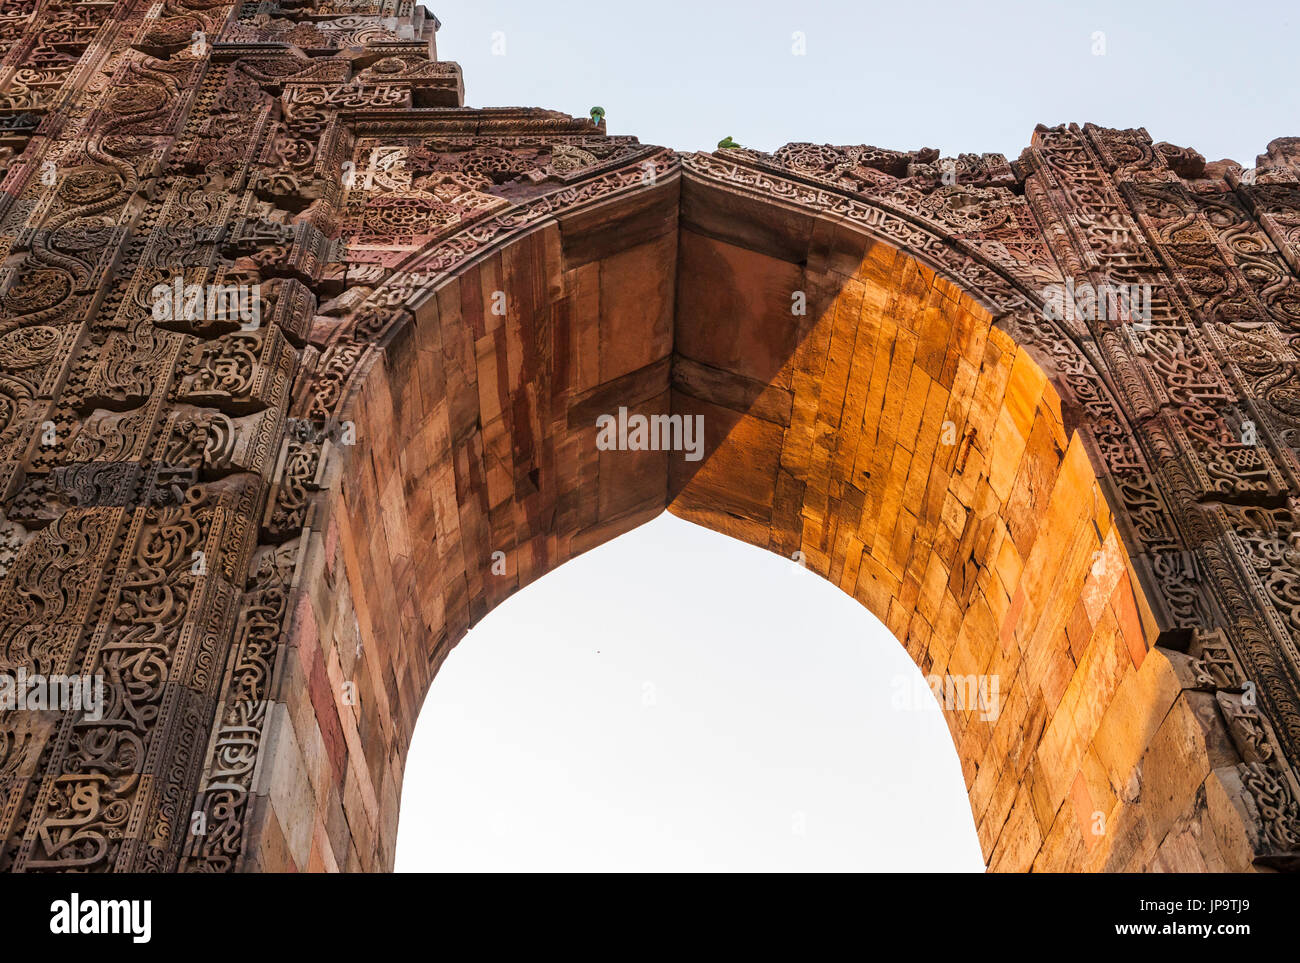 The carved stone arches and walls of the ruins at Qutb Complex in Delhi, India. Stock Photo